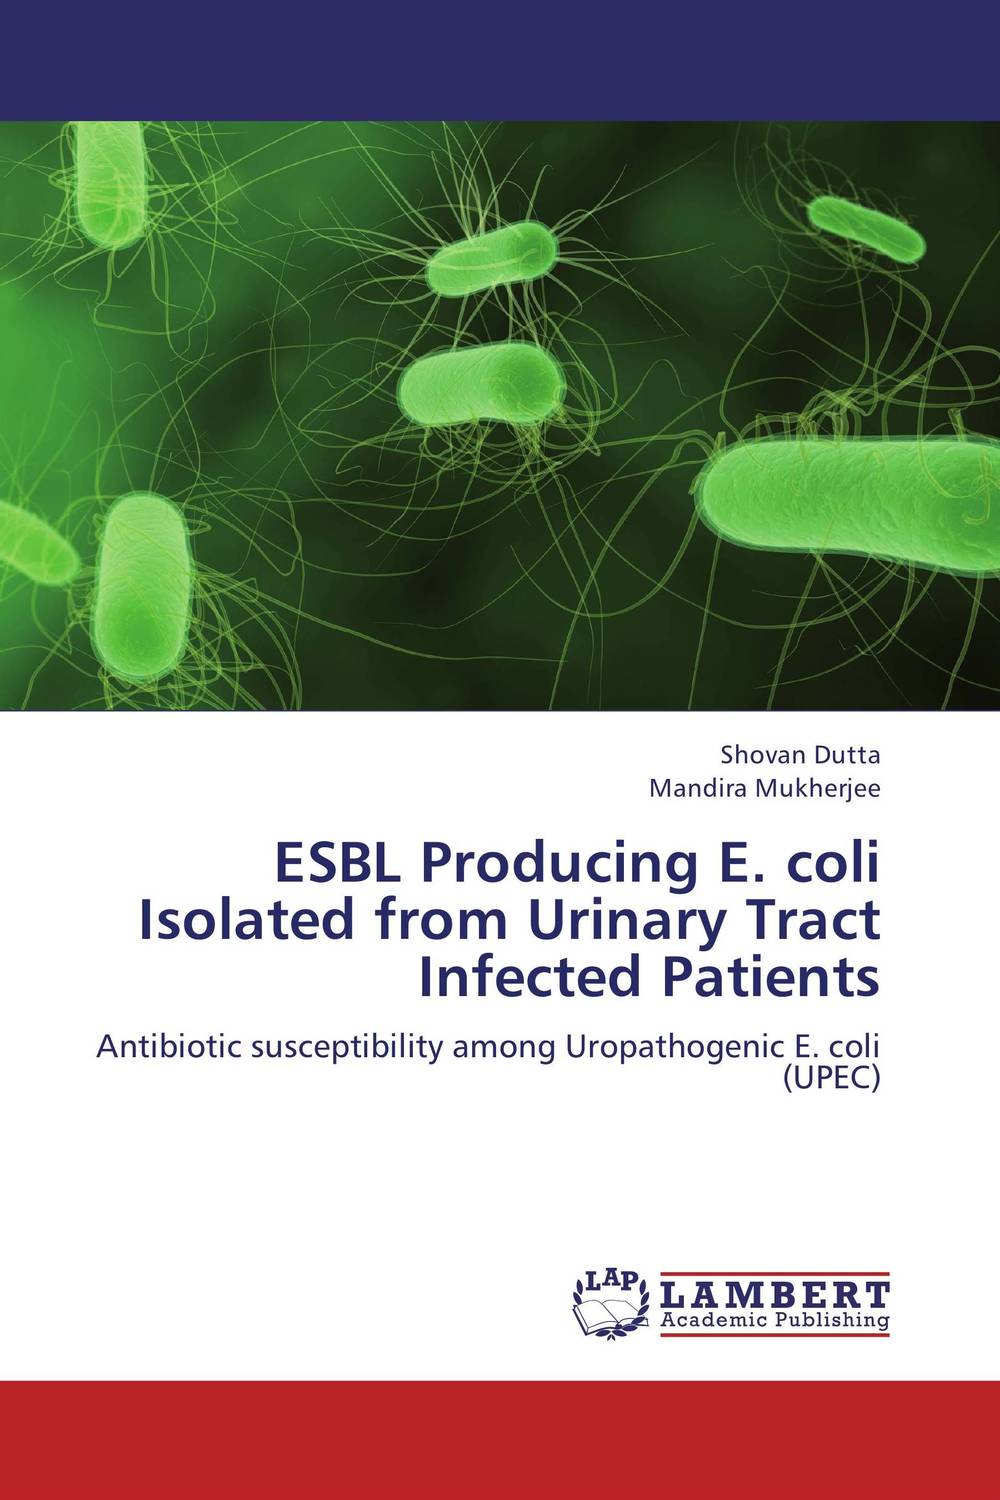 ESBL Producing E. coli Isolated from Urinary Tract Infected Patients